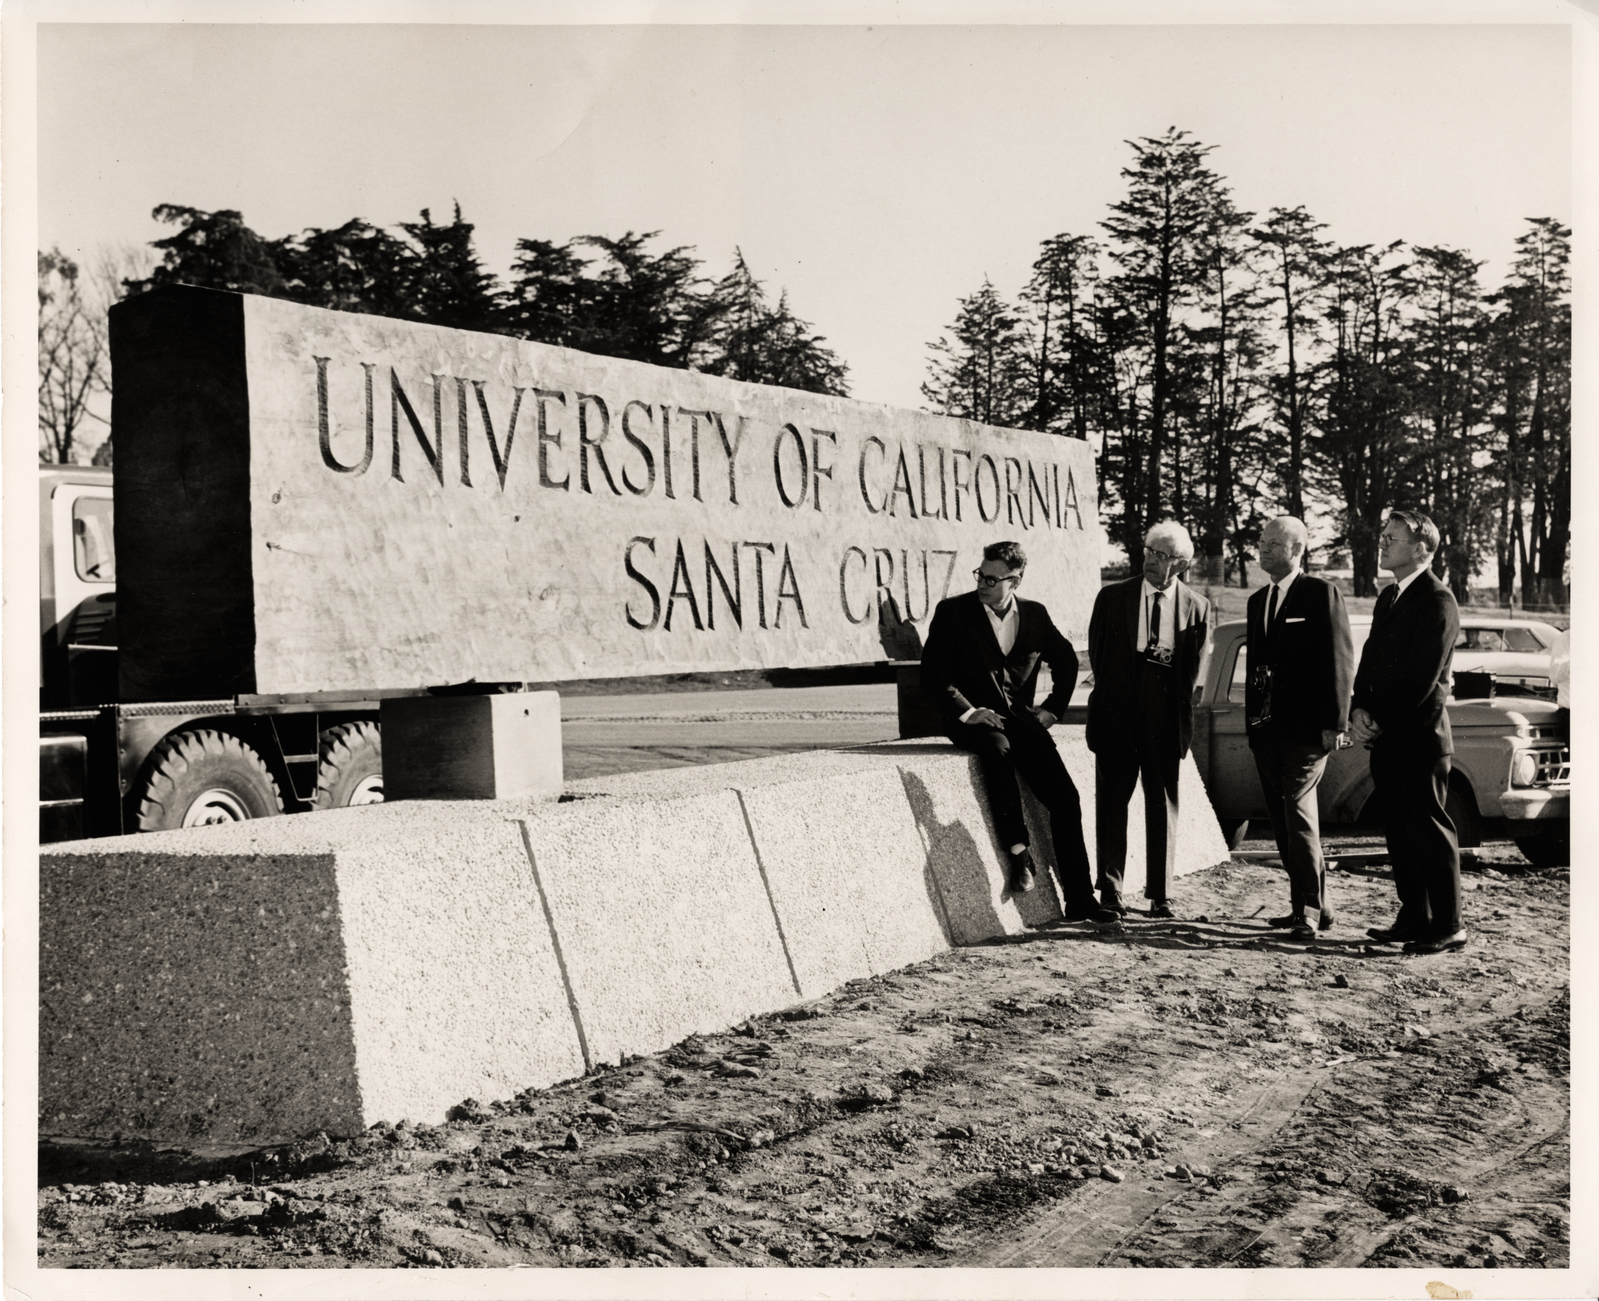 Founders looking at UCSC sign in 1965